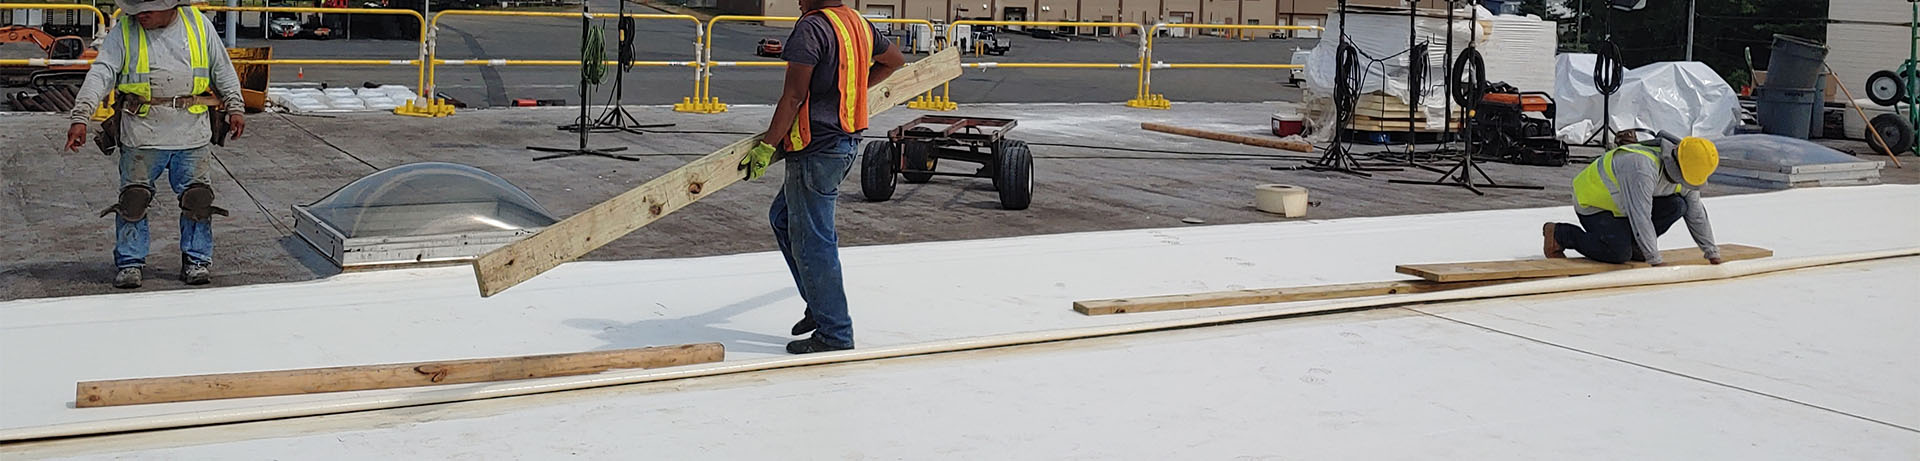 A Vanguard Roofing crew installing a new commercial roof in Poughkeepsie, NY.